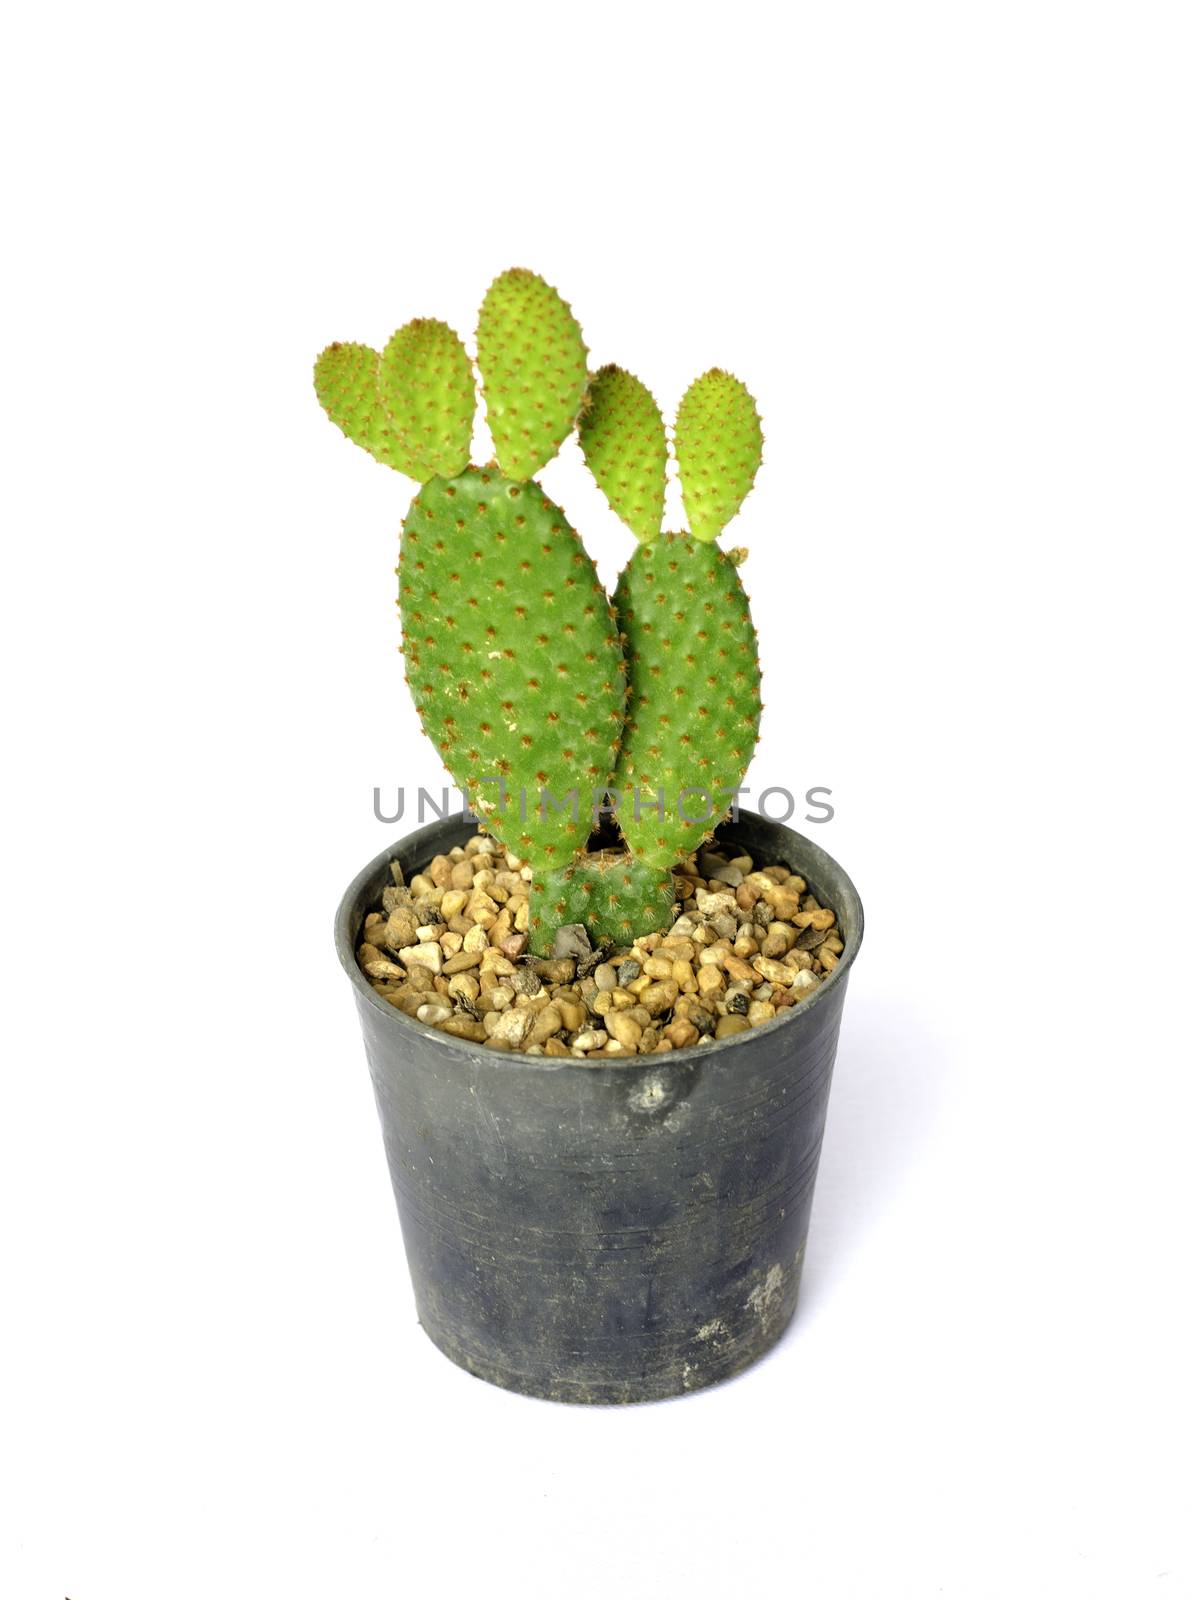 Bunny ears cactus in a pot. on white background